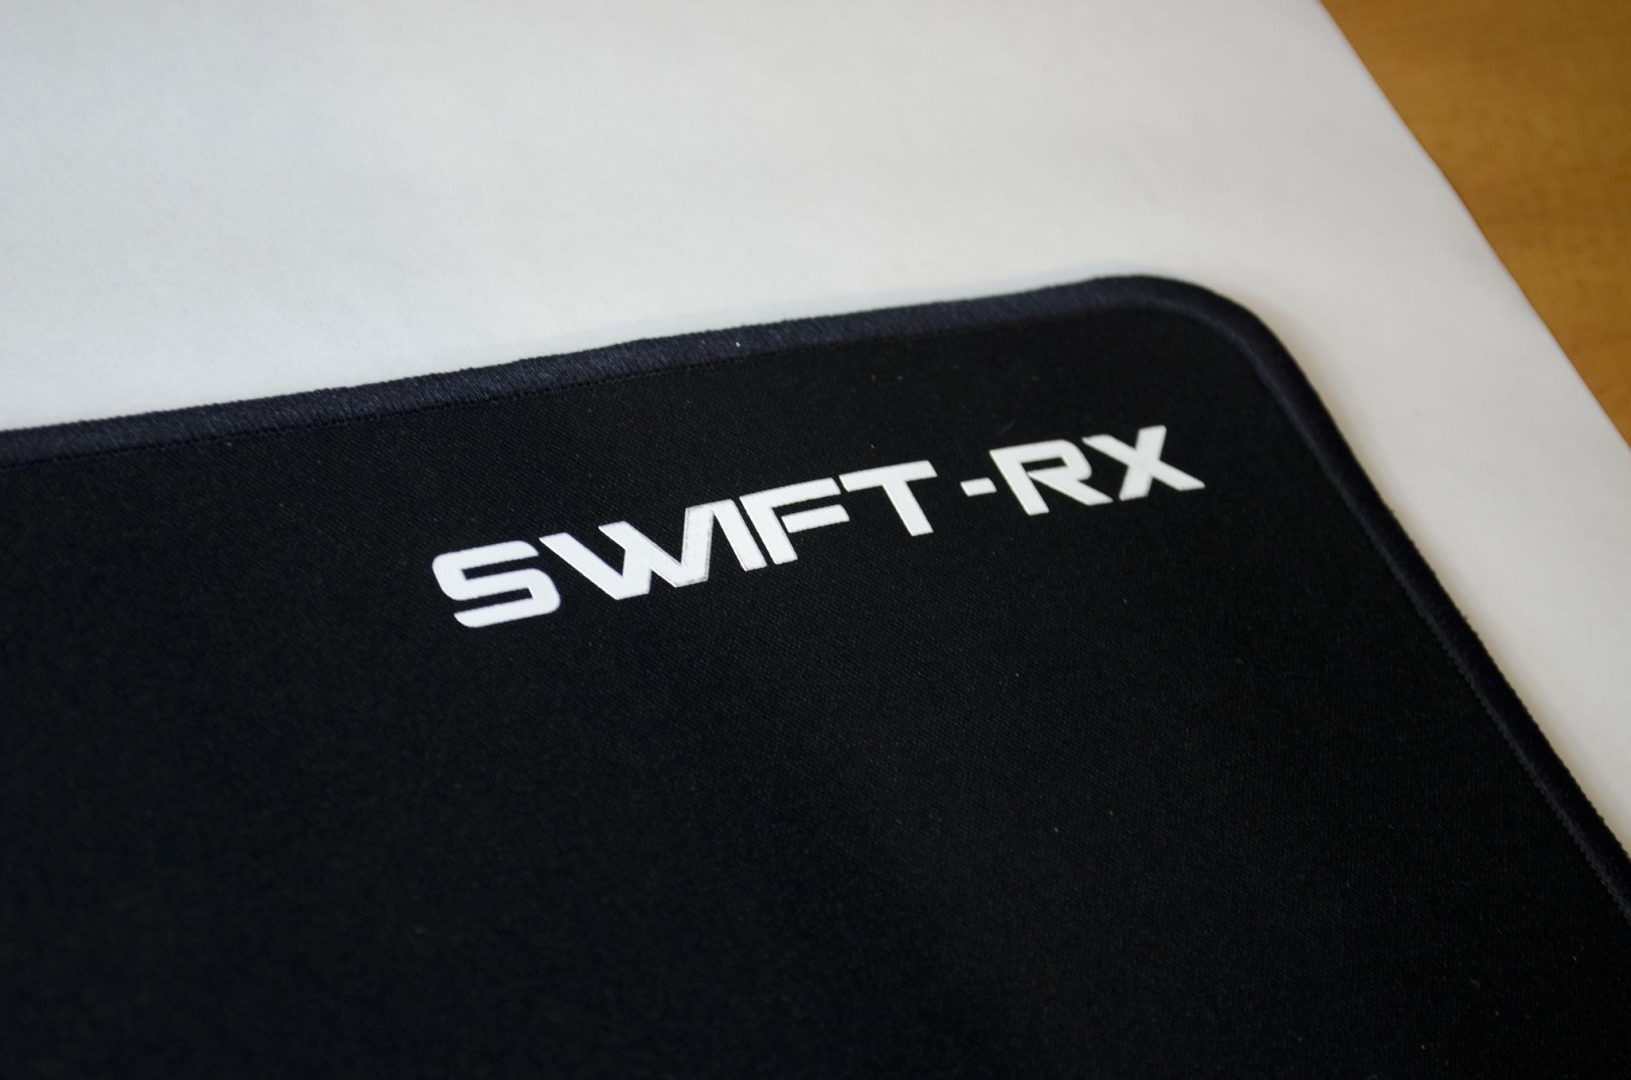 Cooler Master Swift-RX Mousepad Review